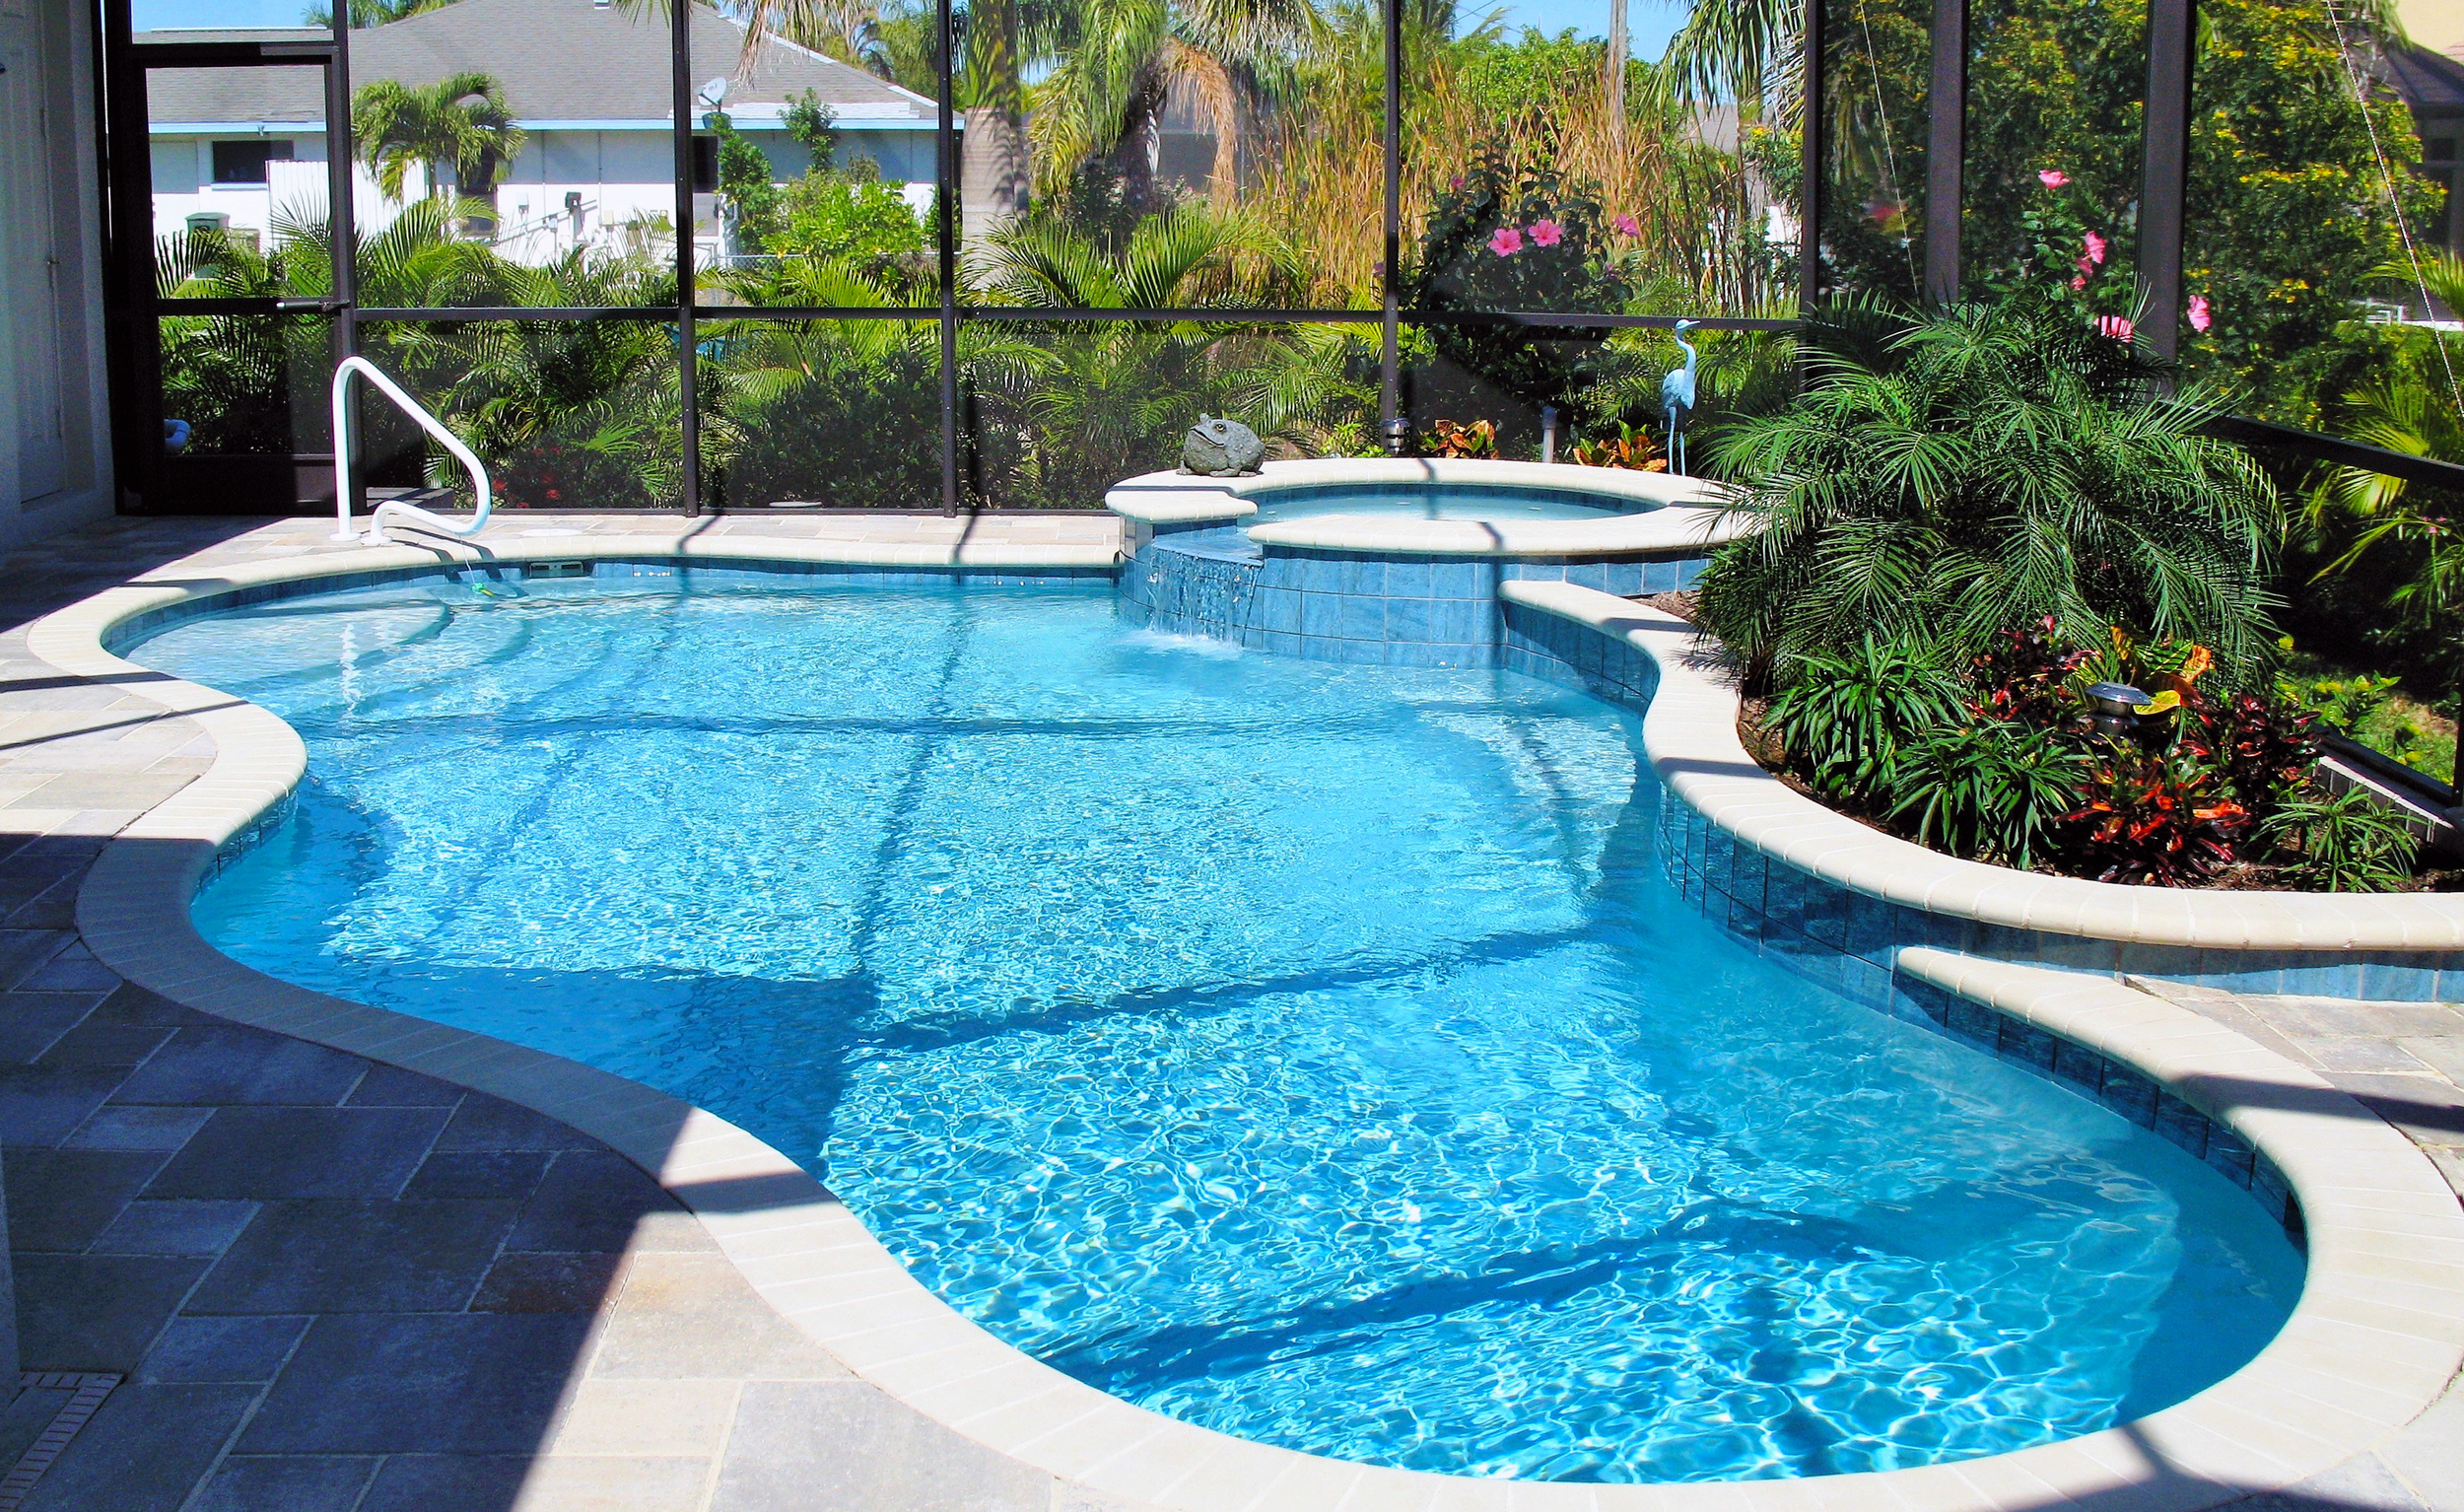 Pool Scouts of Lehigh Acres, Florida - Pool Cleaning Services